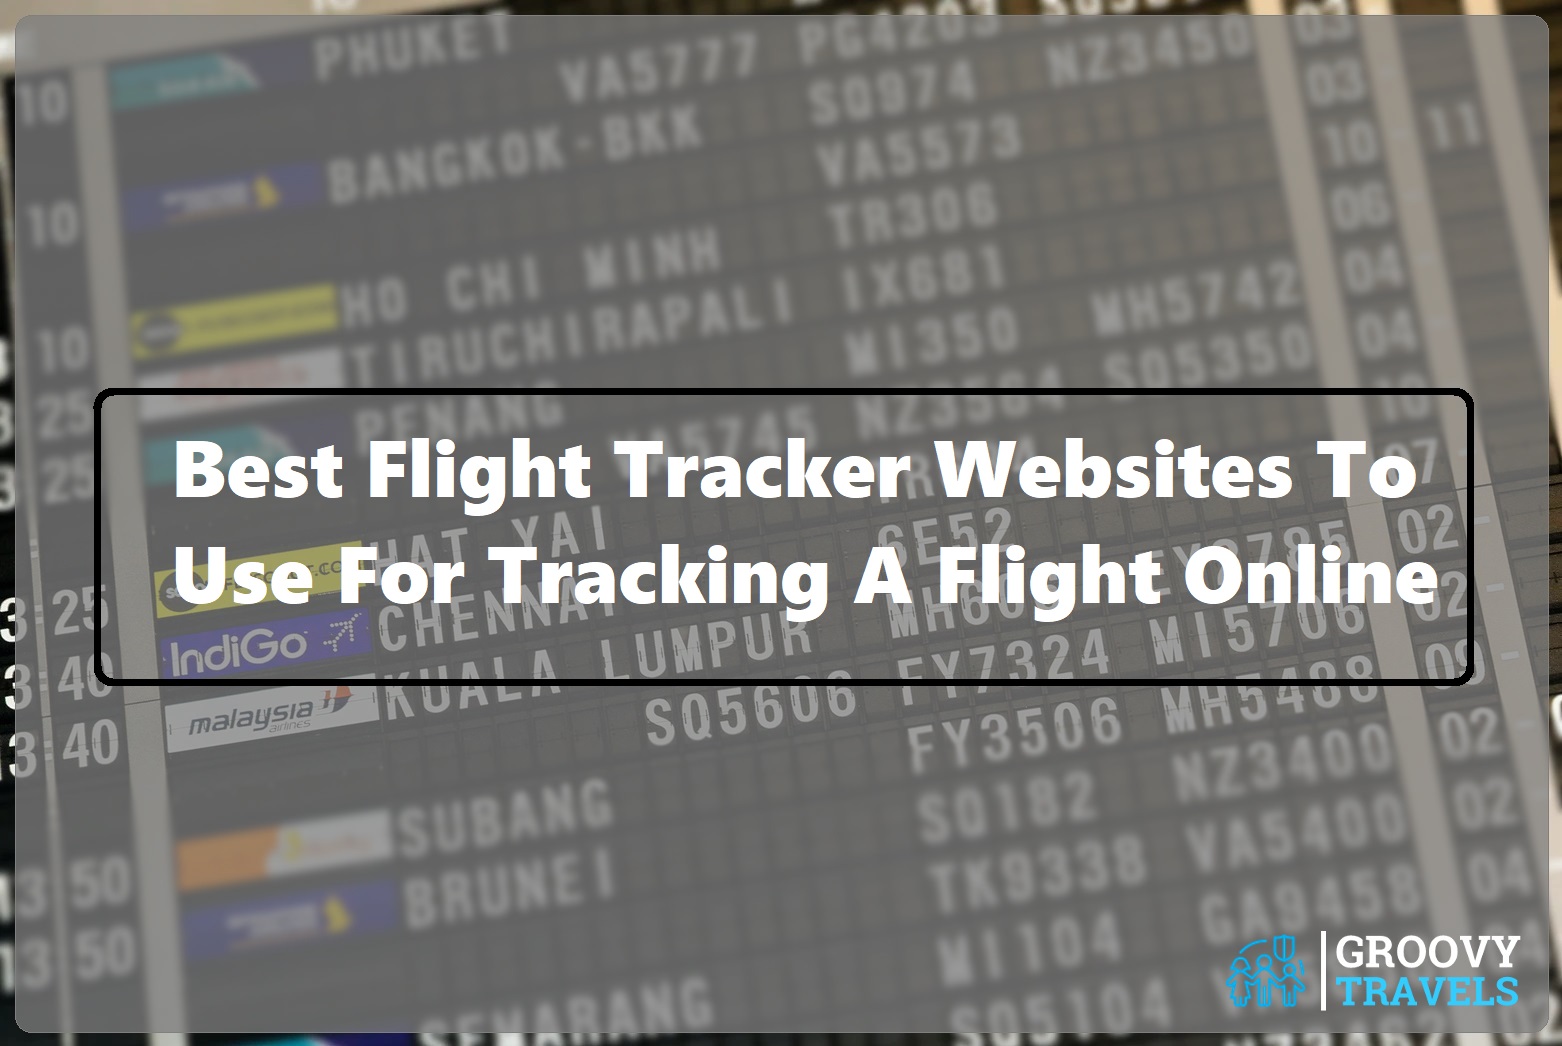 Best Flight Tracker Websites To Use For Tracking A Flight Online